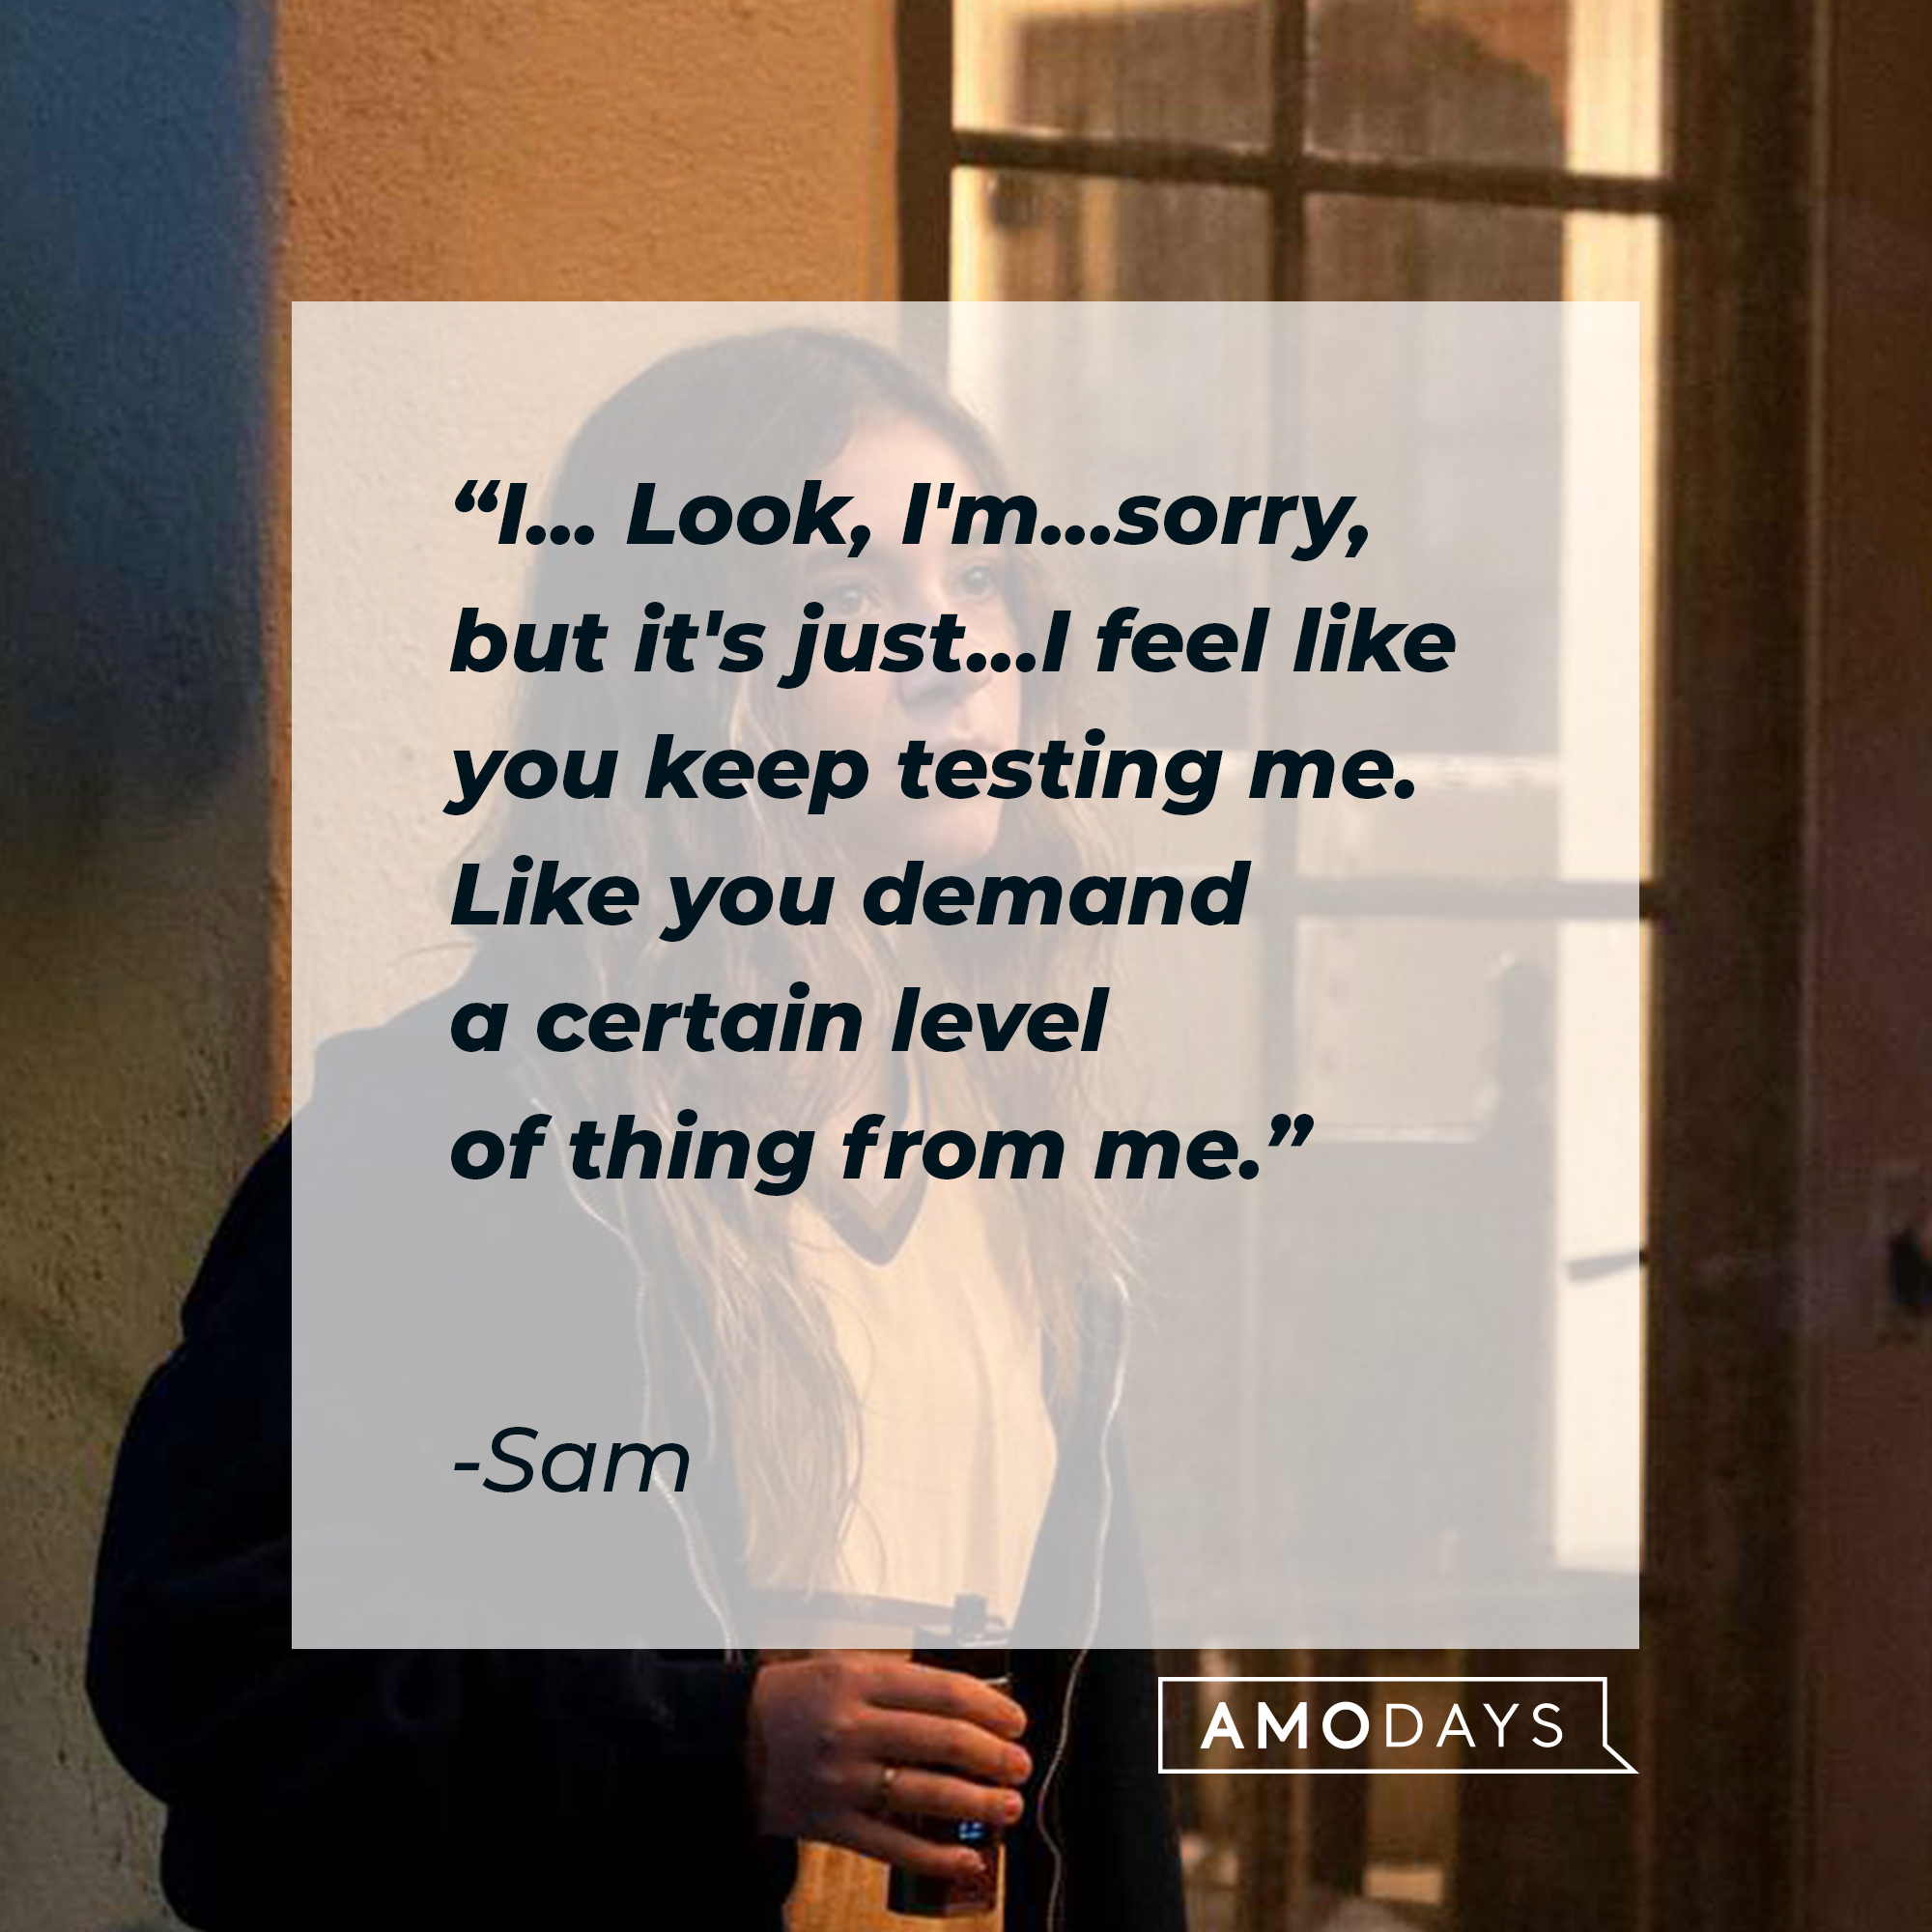 Sam's quote: "I... Look, I'm...sorry, but it's just...I feel like you keep testing me. Like you demand a certain level of thing from me." | Source: facebook.com/BetterThingsFX